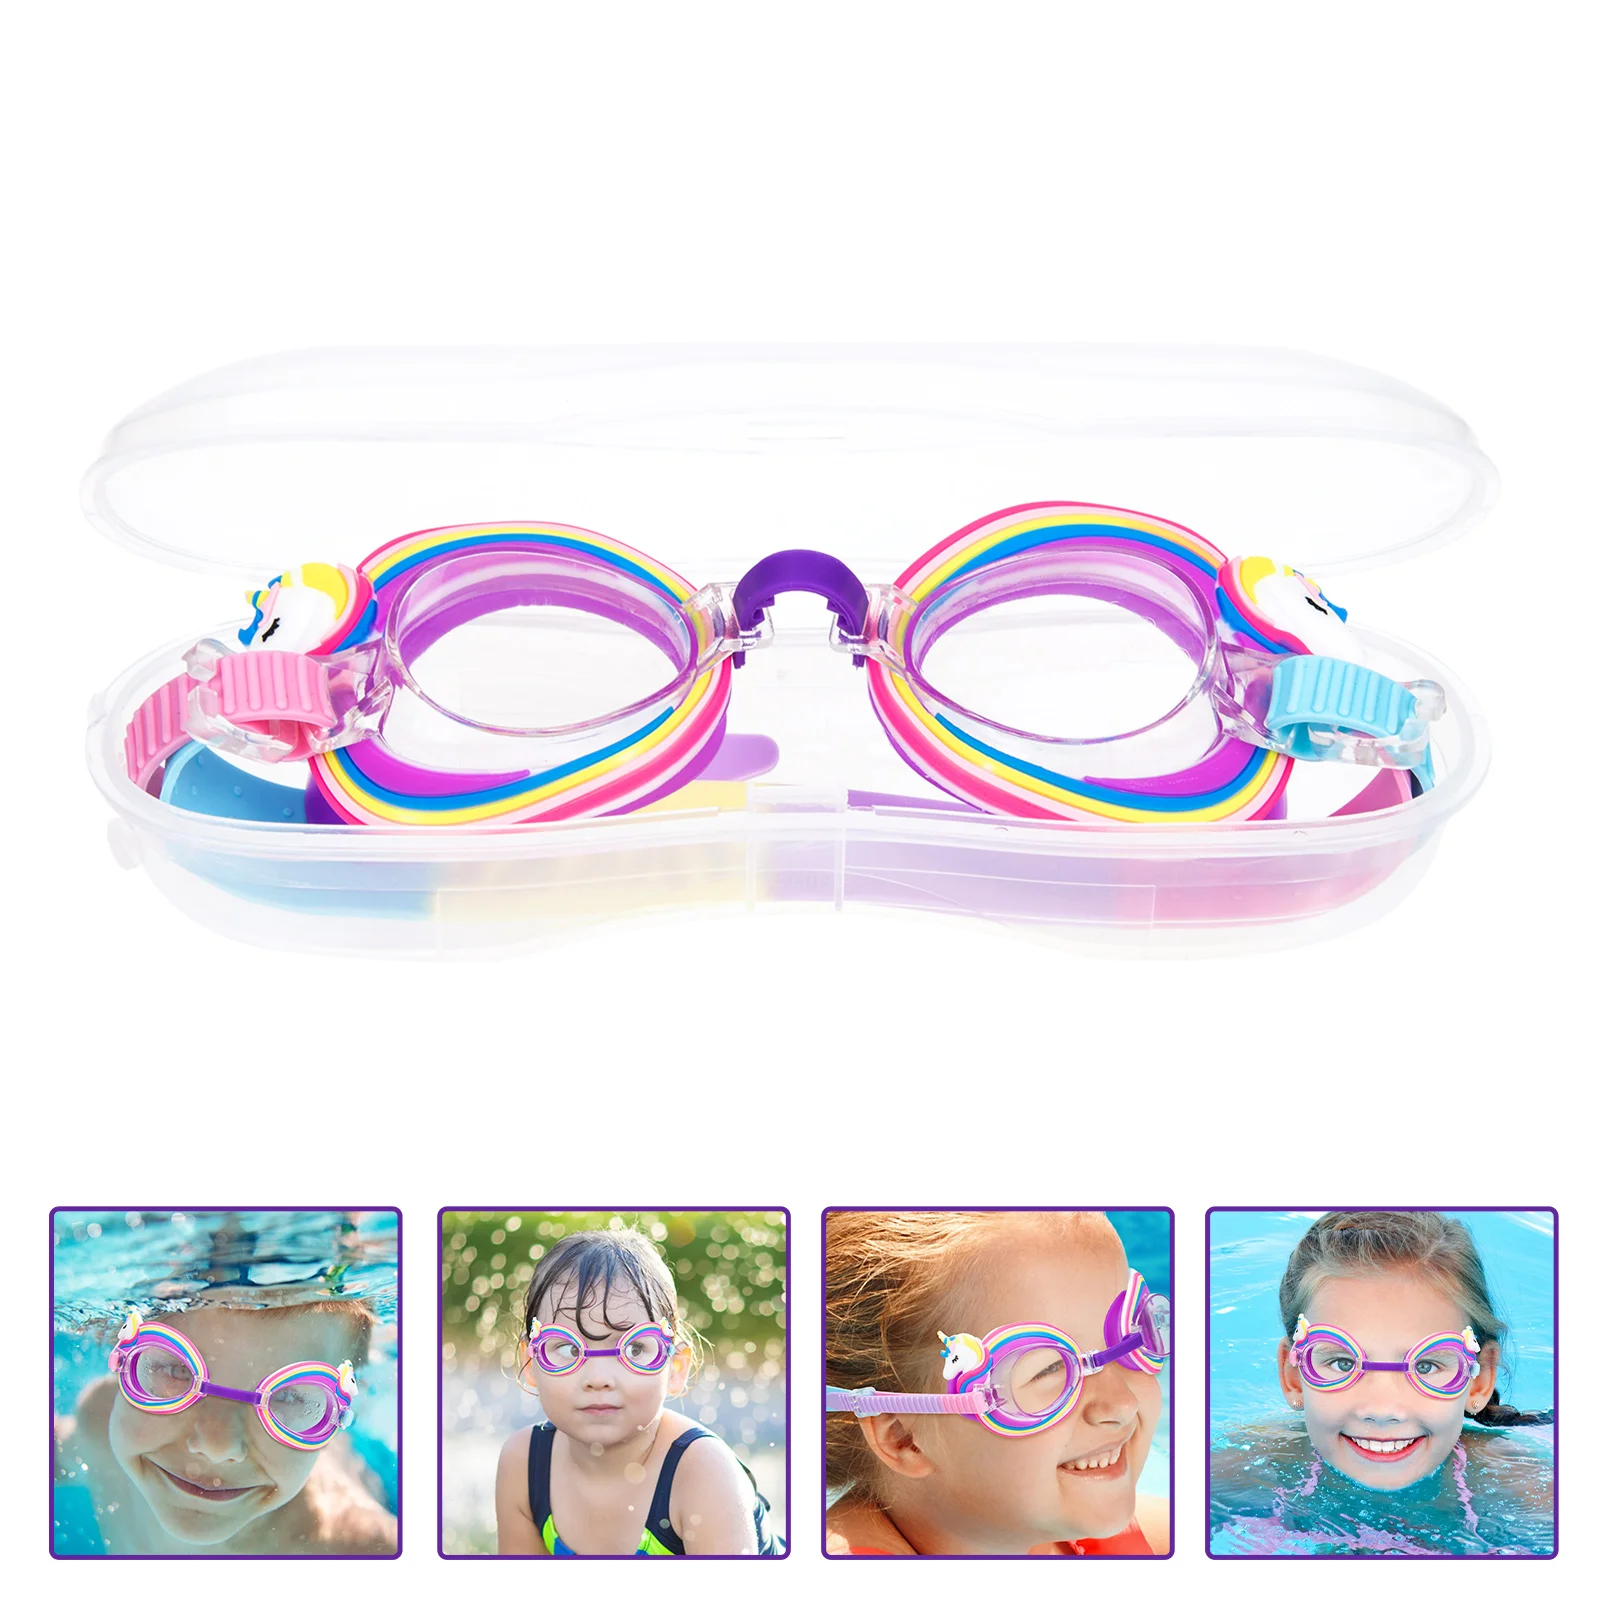 

Cartoon Children's Swimming Goggles for Toddlers Age 2-4 Silica Gel Kids Lovely Swim Goggles With Nose Cover